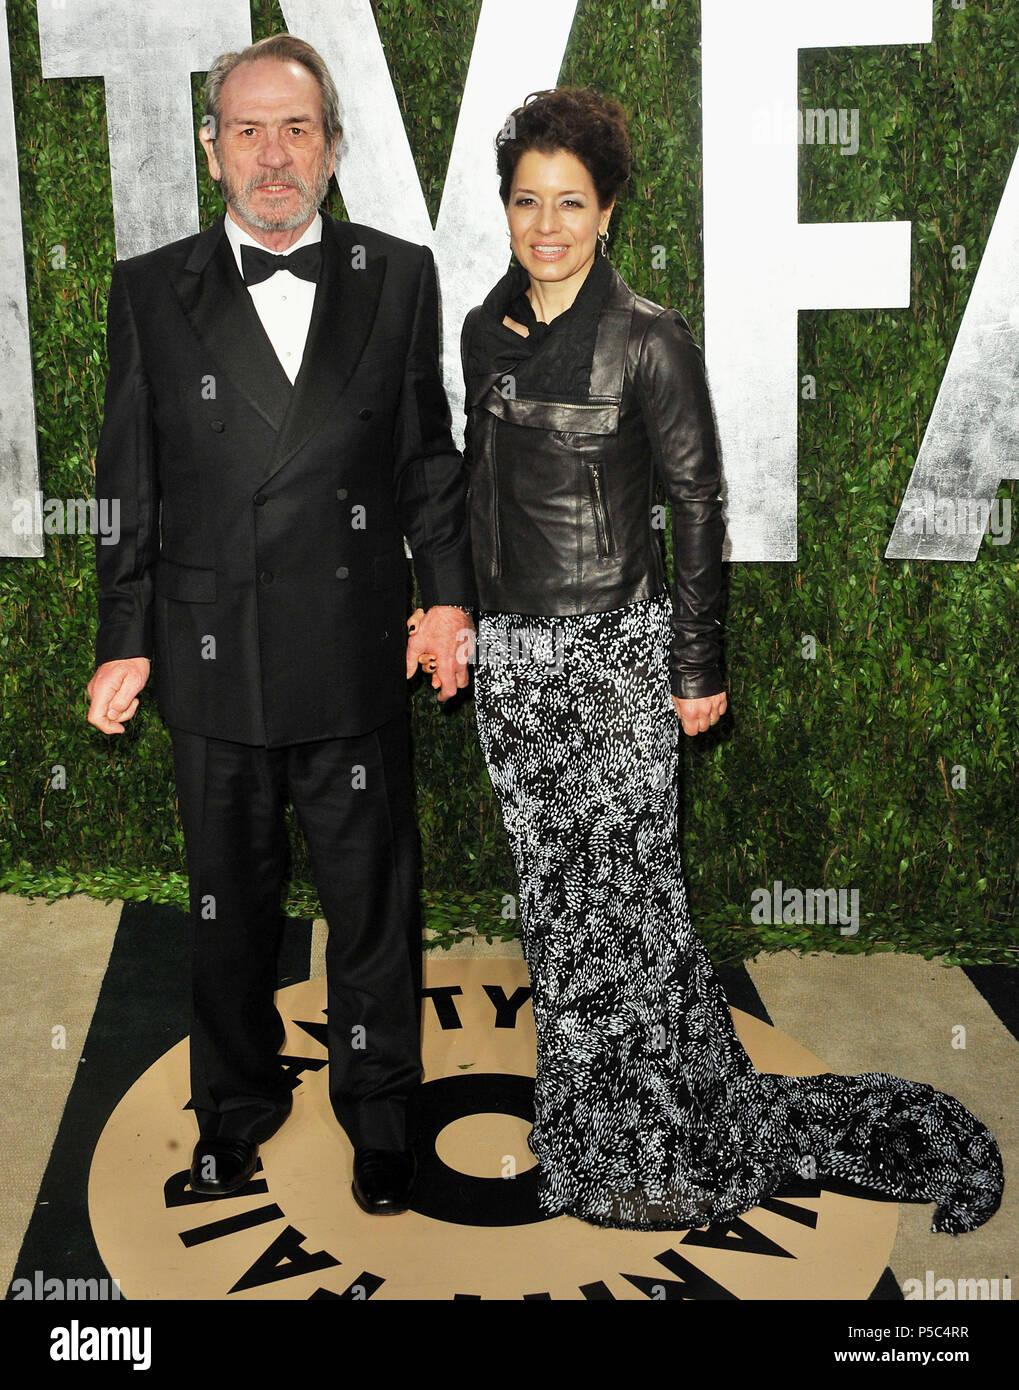 Tommy Lee Jones and wife  at the Vanity Fair 2013 Oscar party at the Sunset Tower in Los Angeles.Tommy Lee Jones and wife  ------------- Red Carpet Event, Vertical, USA, Film Industry, Celebrities,  Photography, Bestof, Arts Culture and Entertainment, Topix Celebrities fashion /  Vertical, Best of, Event in Hollywood Life - California,  Red Carpet and backstage, USA, Film Industry, Celebrities,  movie celebrities, TV celebrities, Music celebrities, Photography, Bestof, Arts Culture and Entertainment,  Topix, vertical,  family from from the year , 2013, inquiry tsuni@Gamma-USA.com Husband and w Stock Photo